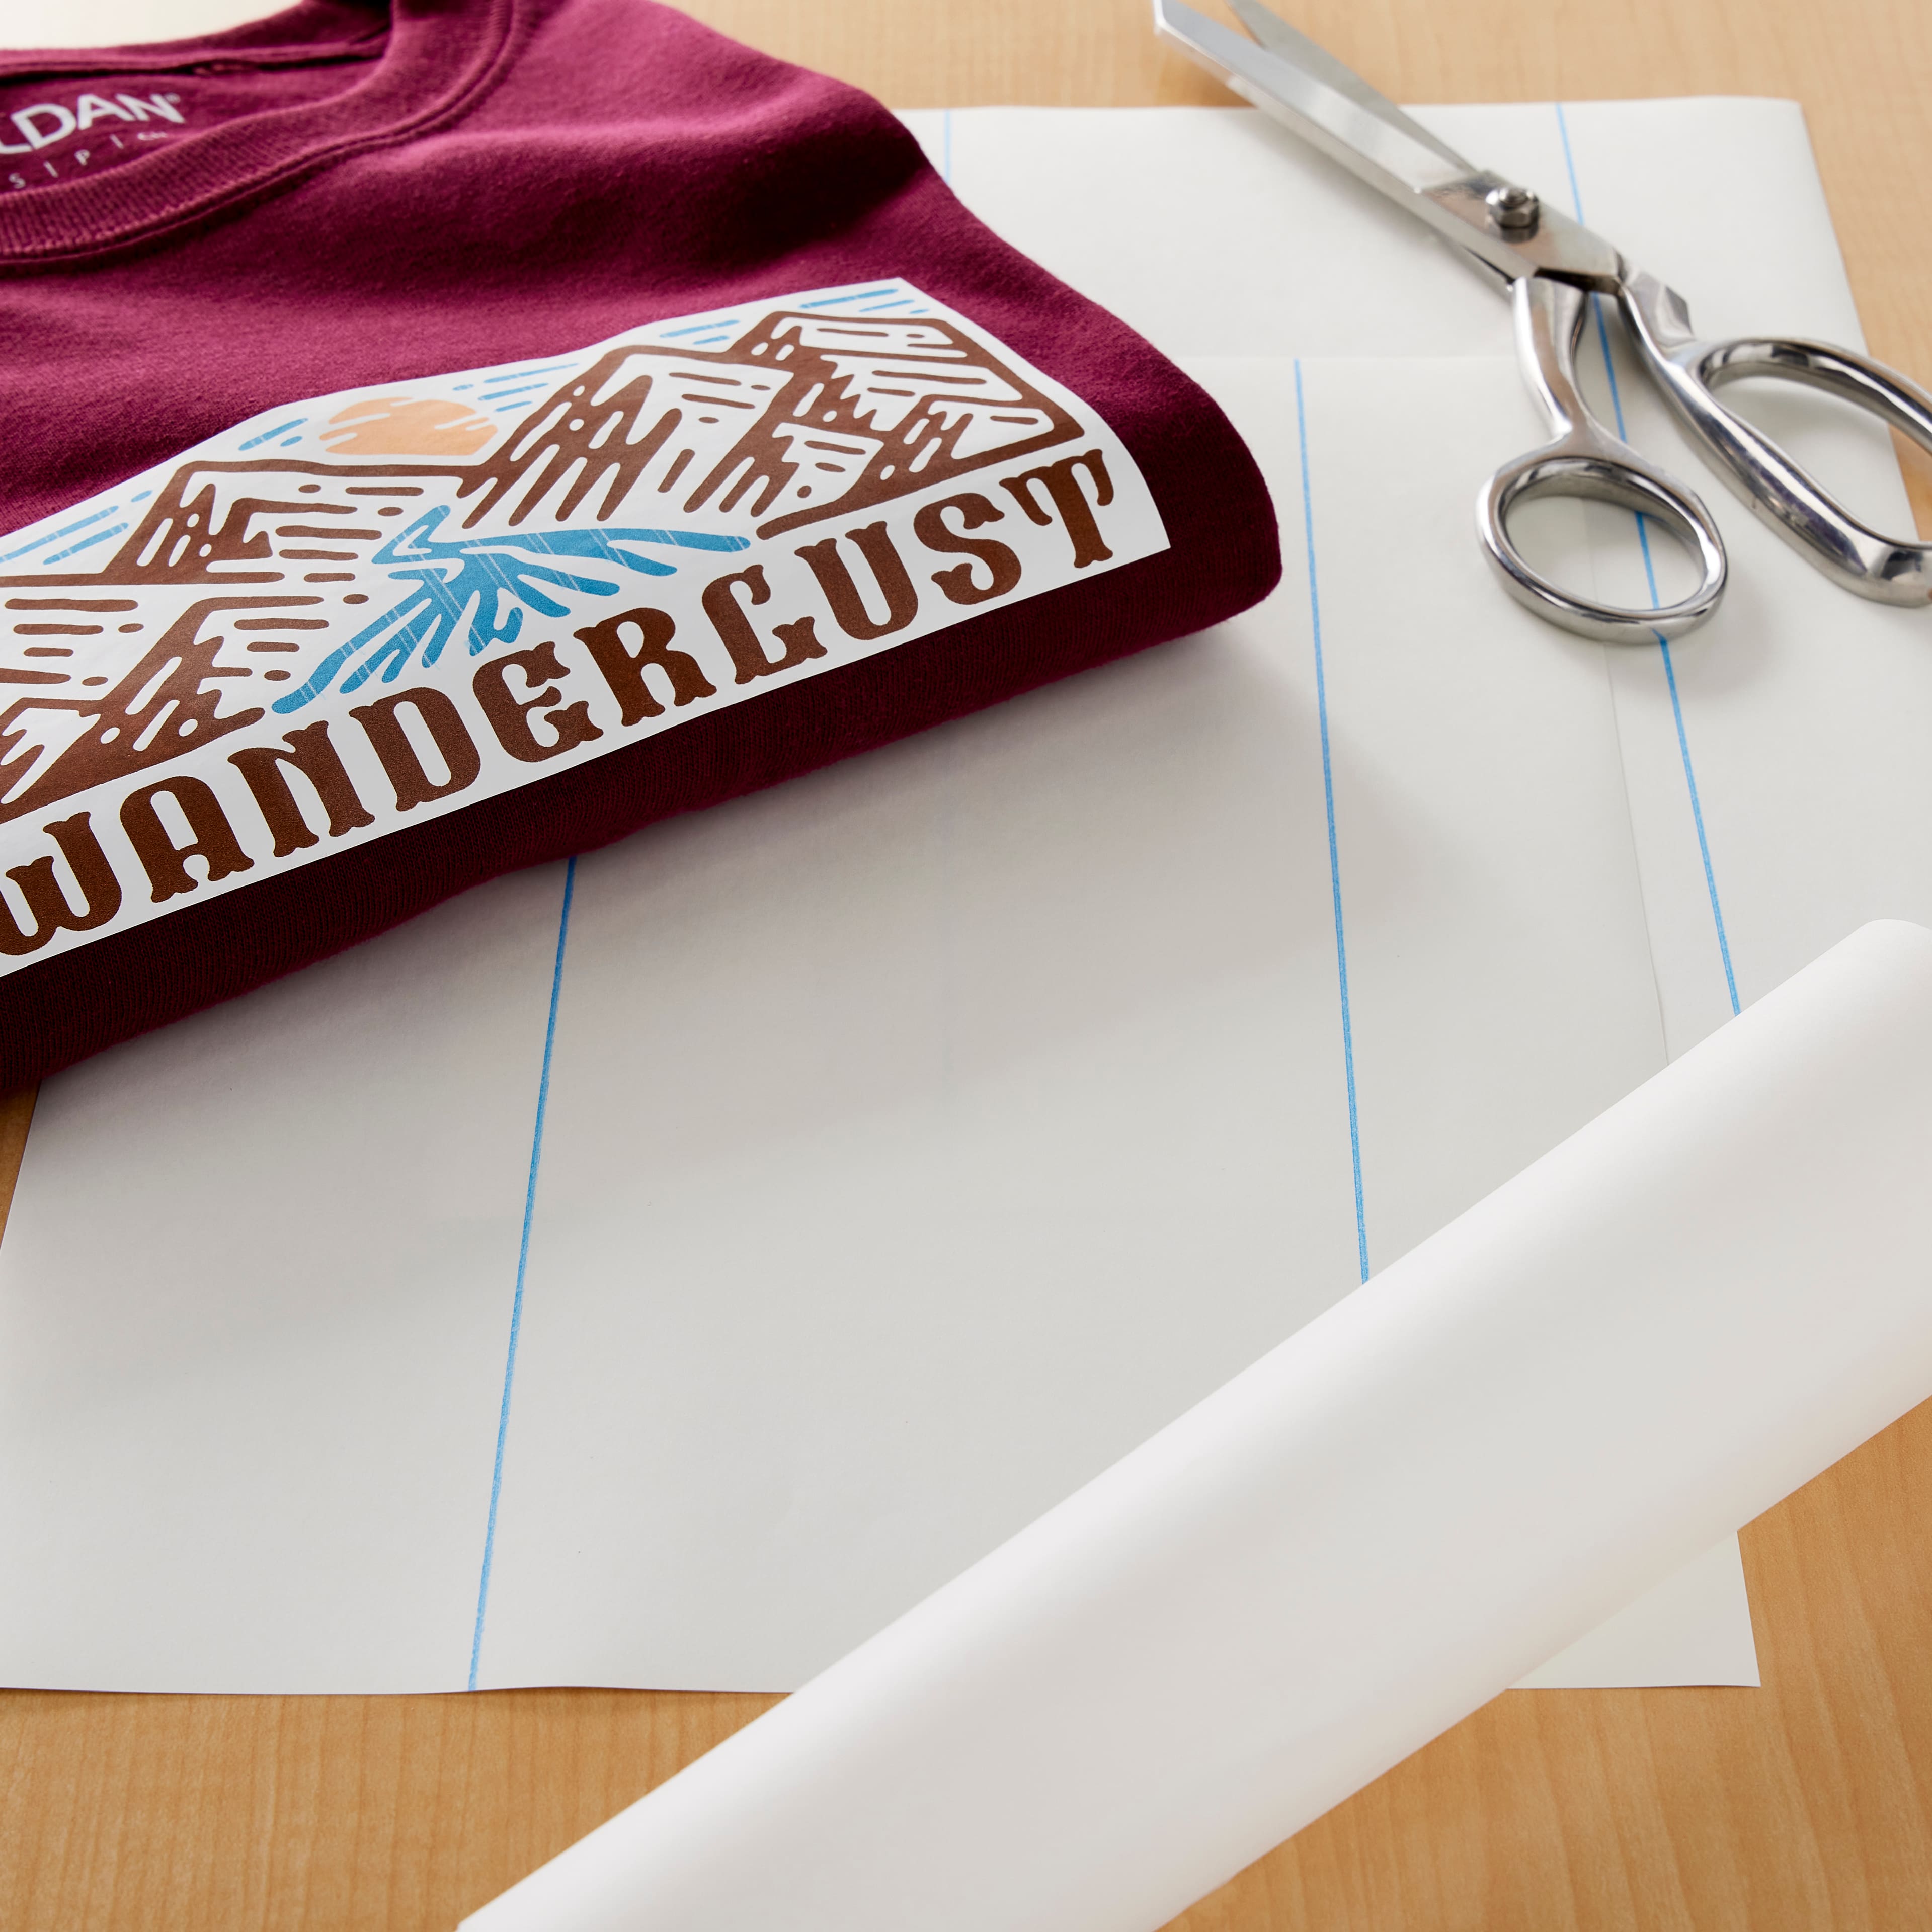 Jolee's Boutique® Iron-on Transfer Paper for White Fabric